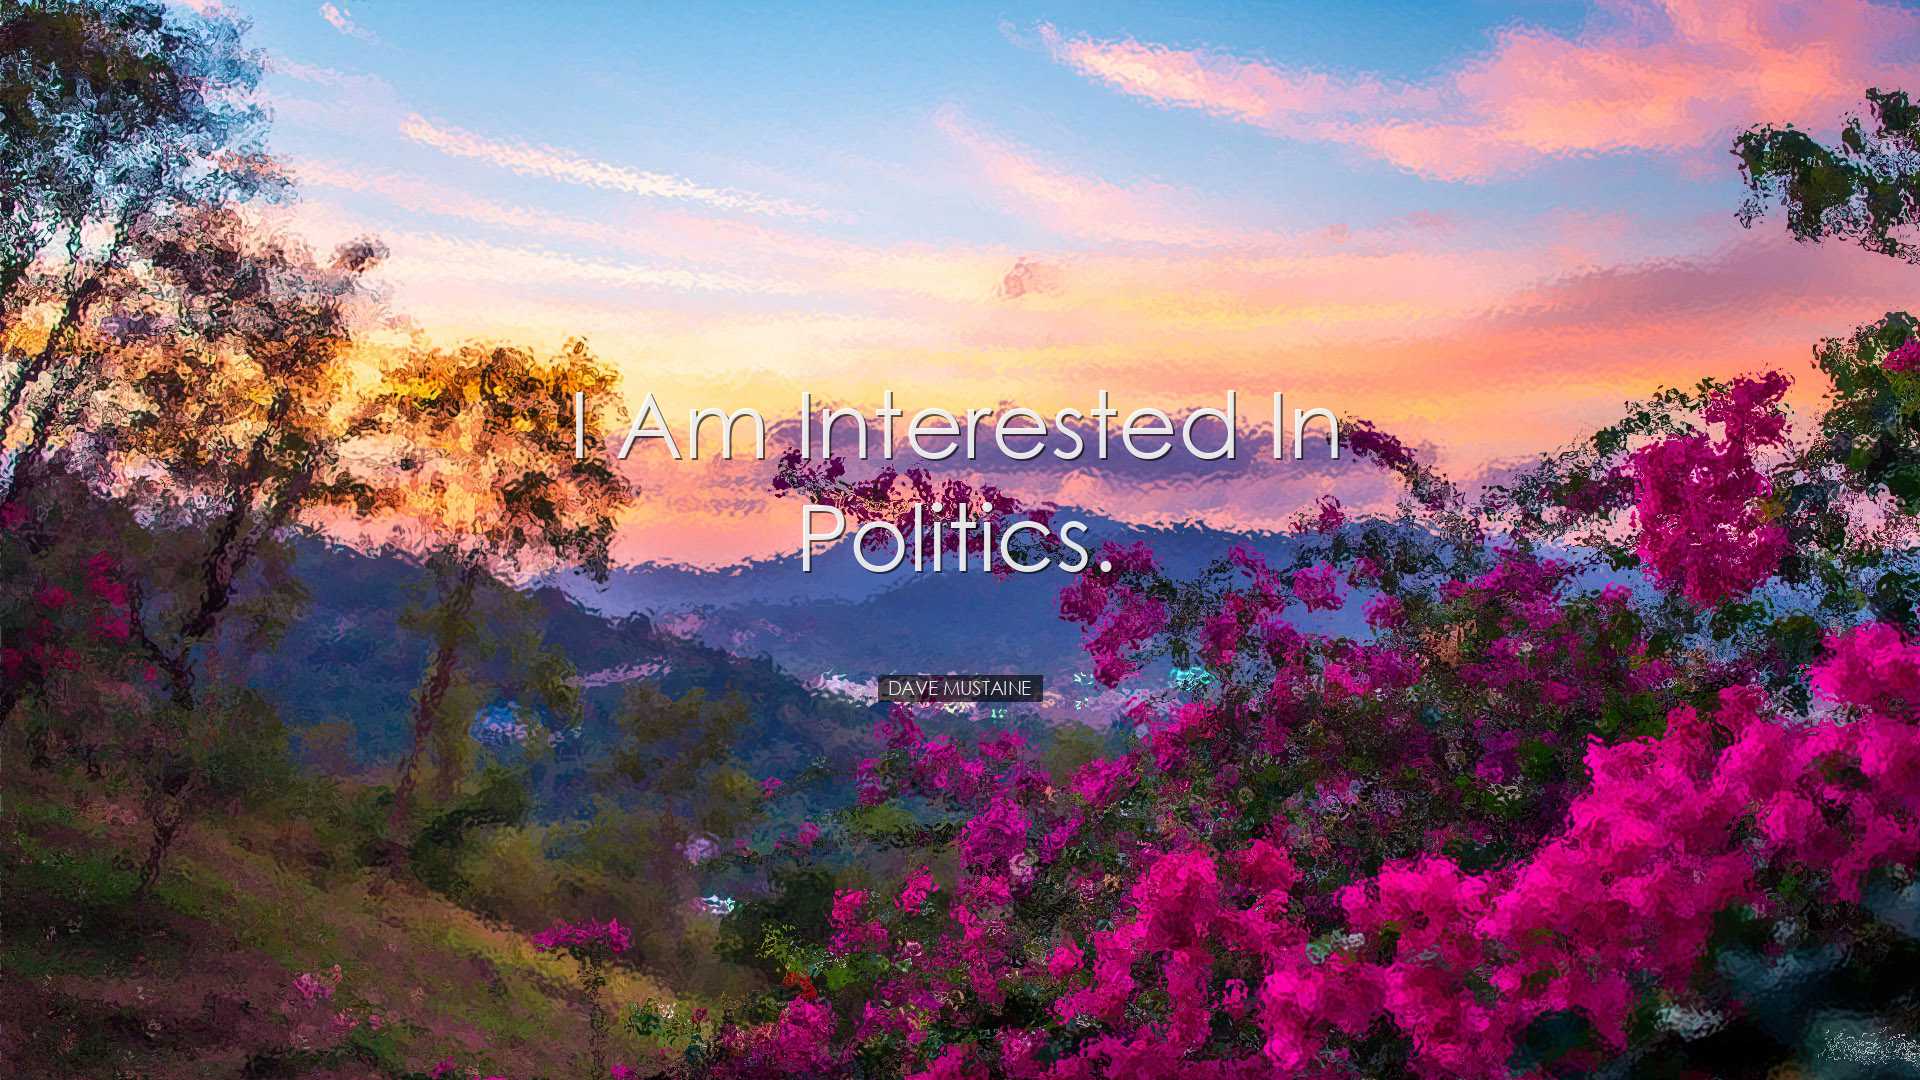 I am interested in politics. - Dave Mustaine